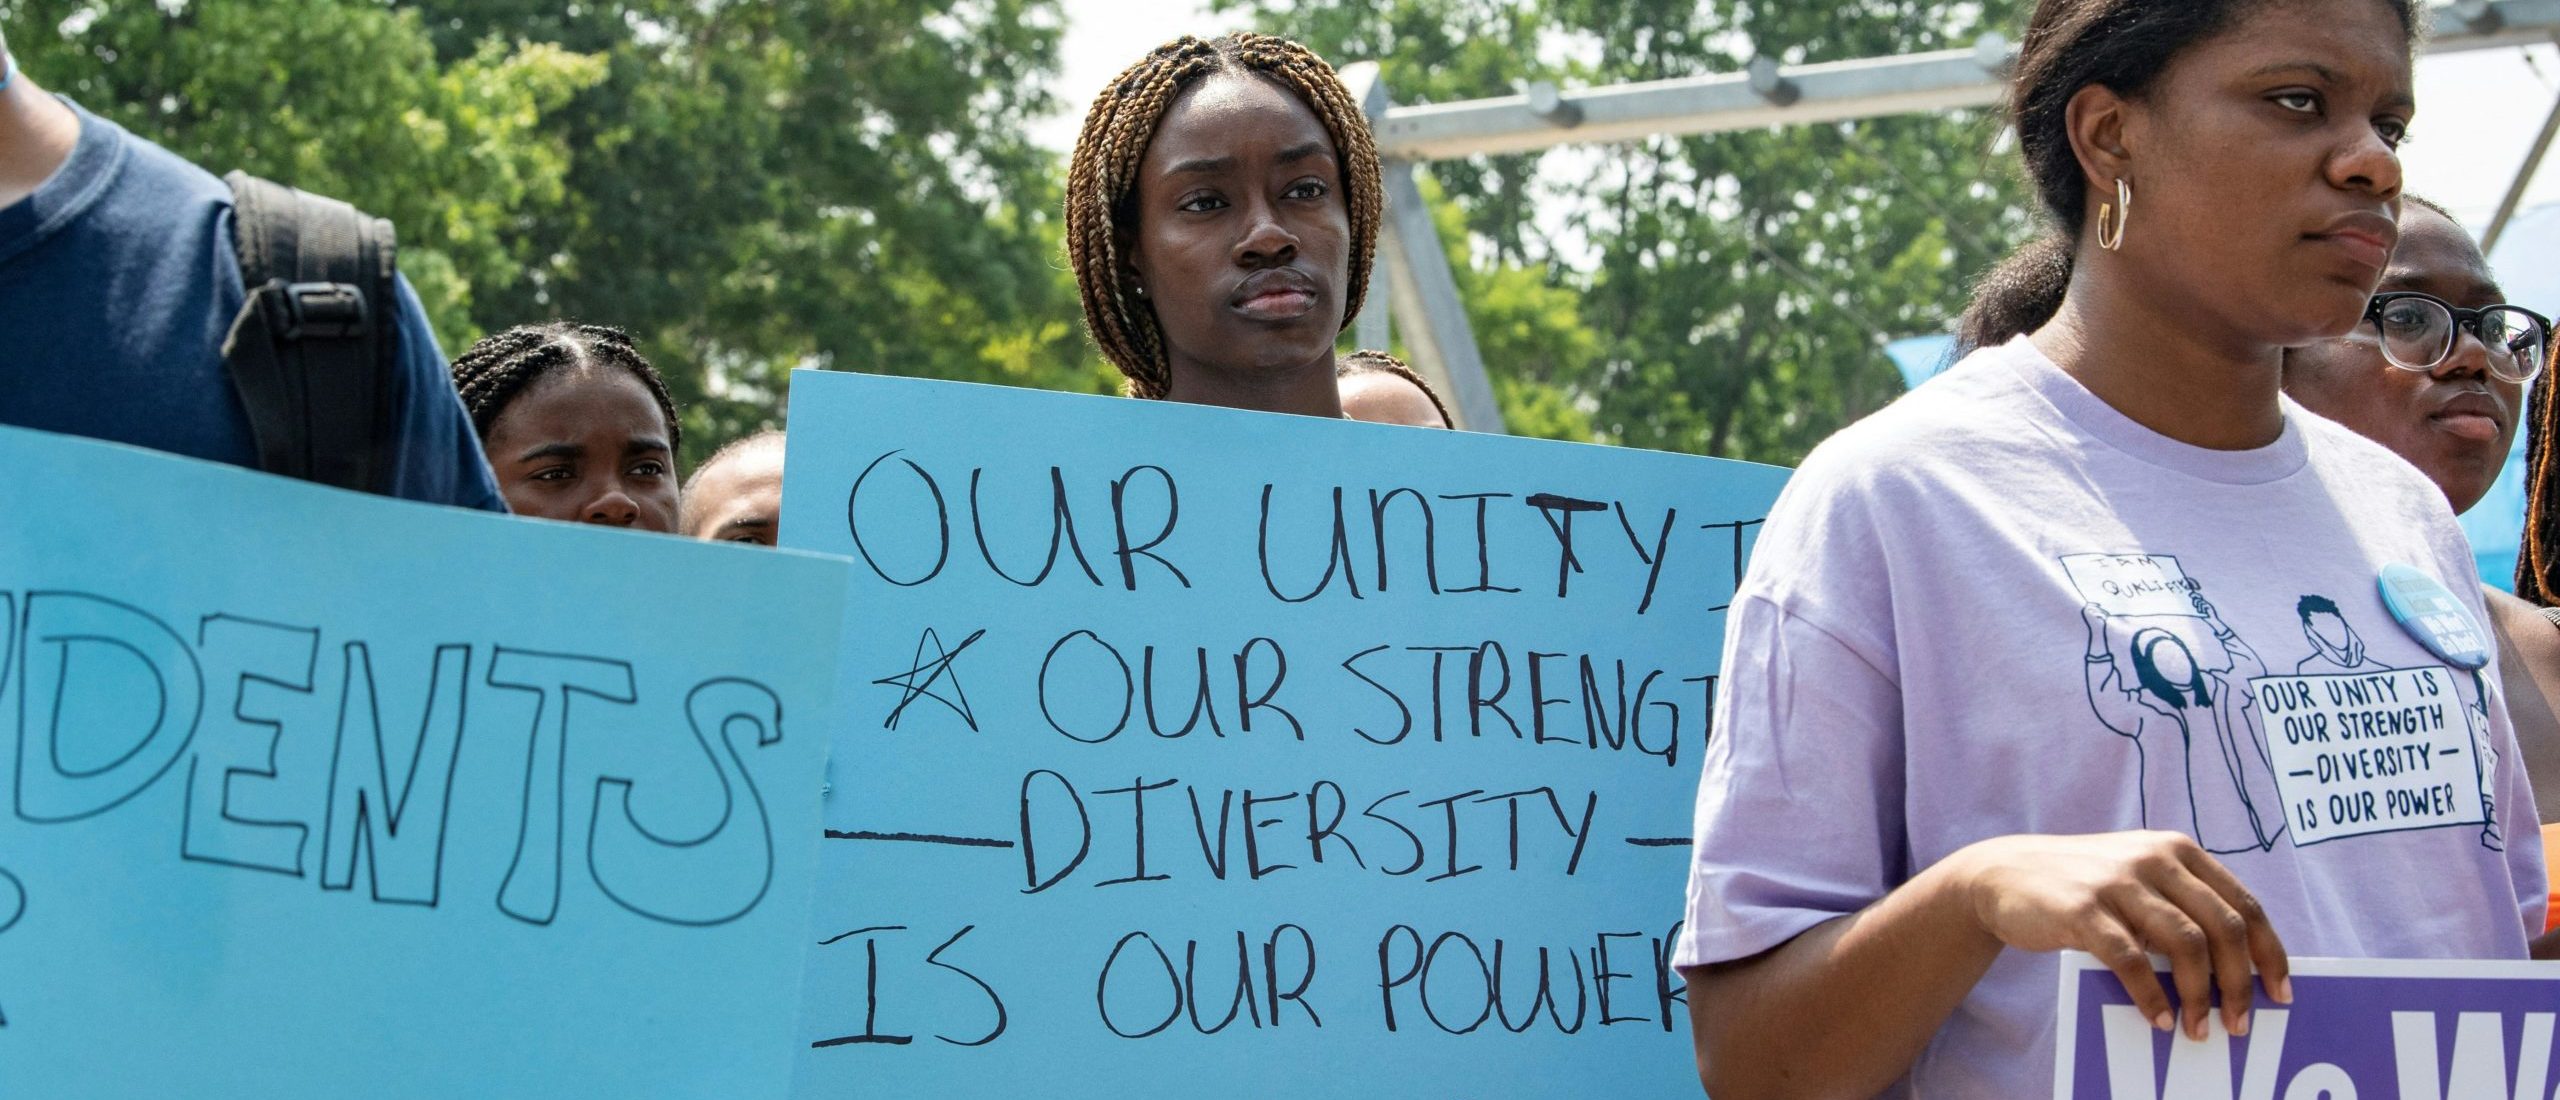 Proponents of affirmative action hold signs during a protest at Harvard University in Cambridge, Massachusetts, on July 1, 2023. The US Supreme Court on June 27 banned the use of race and ethnicity in university admissions, dealing a major blow to a decades-old practice that boosted educational opportunities for African-Americans and other minorities. (Photo by Joseph Prezioso / AFP) (Photo by JOSEPH PREZIOSO/AFP via Getty Images)